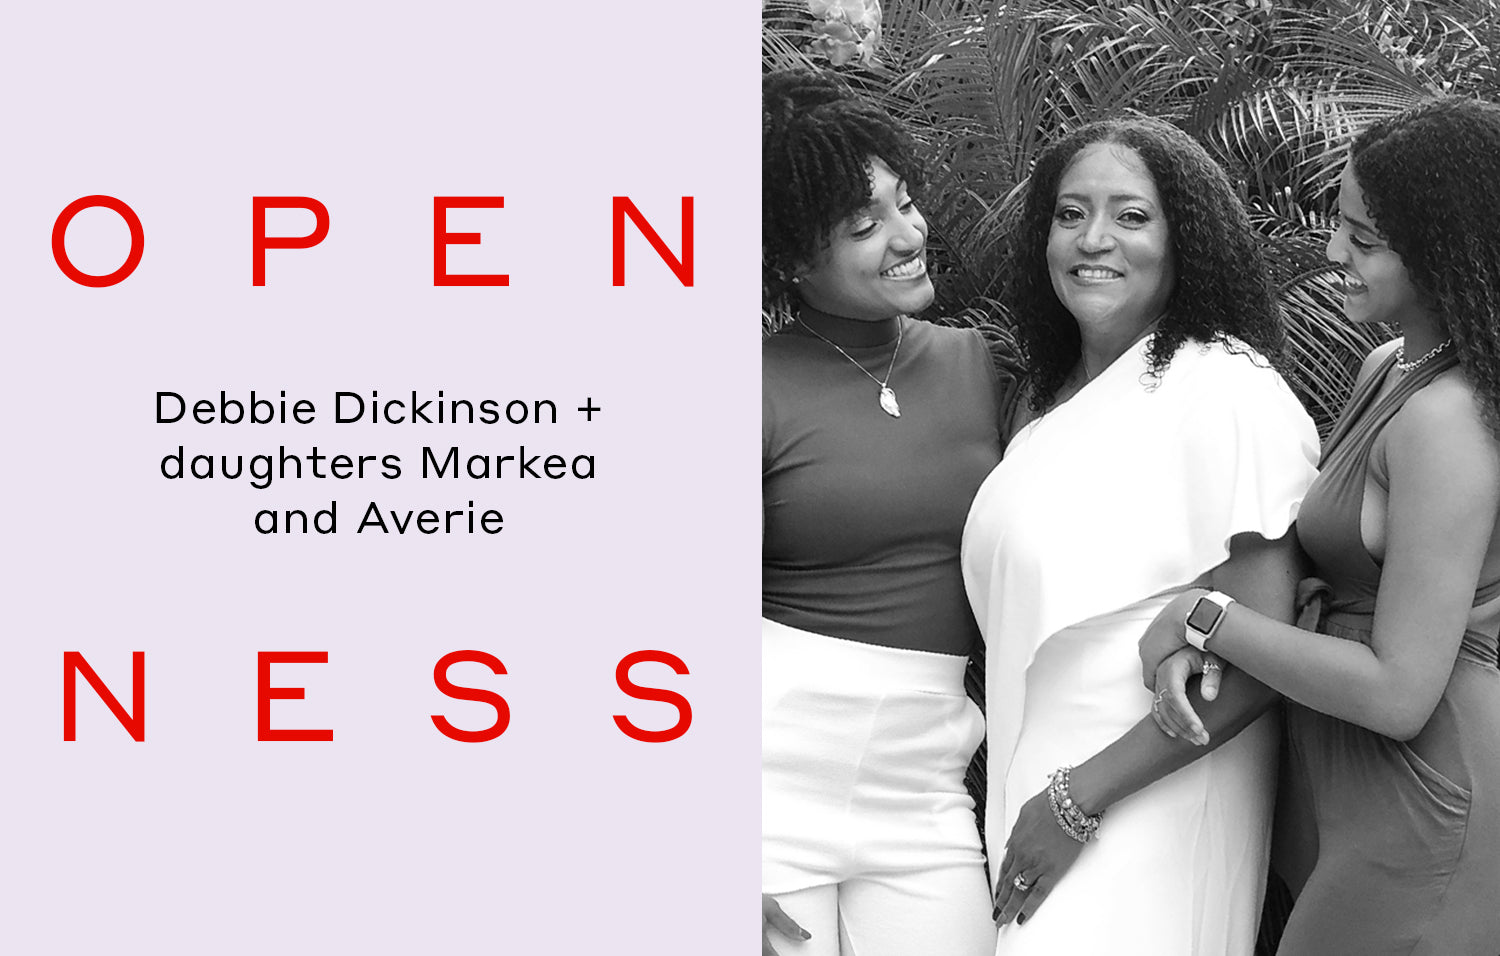 Debbie Dickinson and daughters talk about openness for Womaness